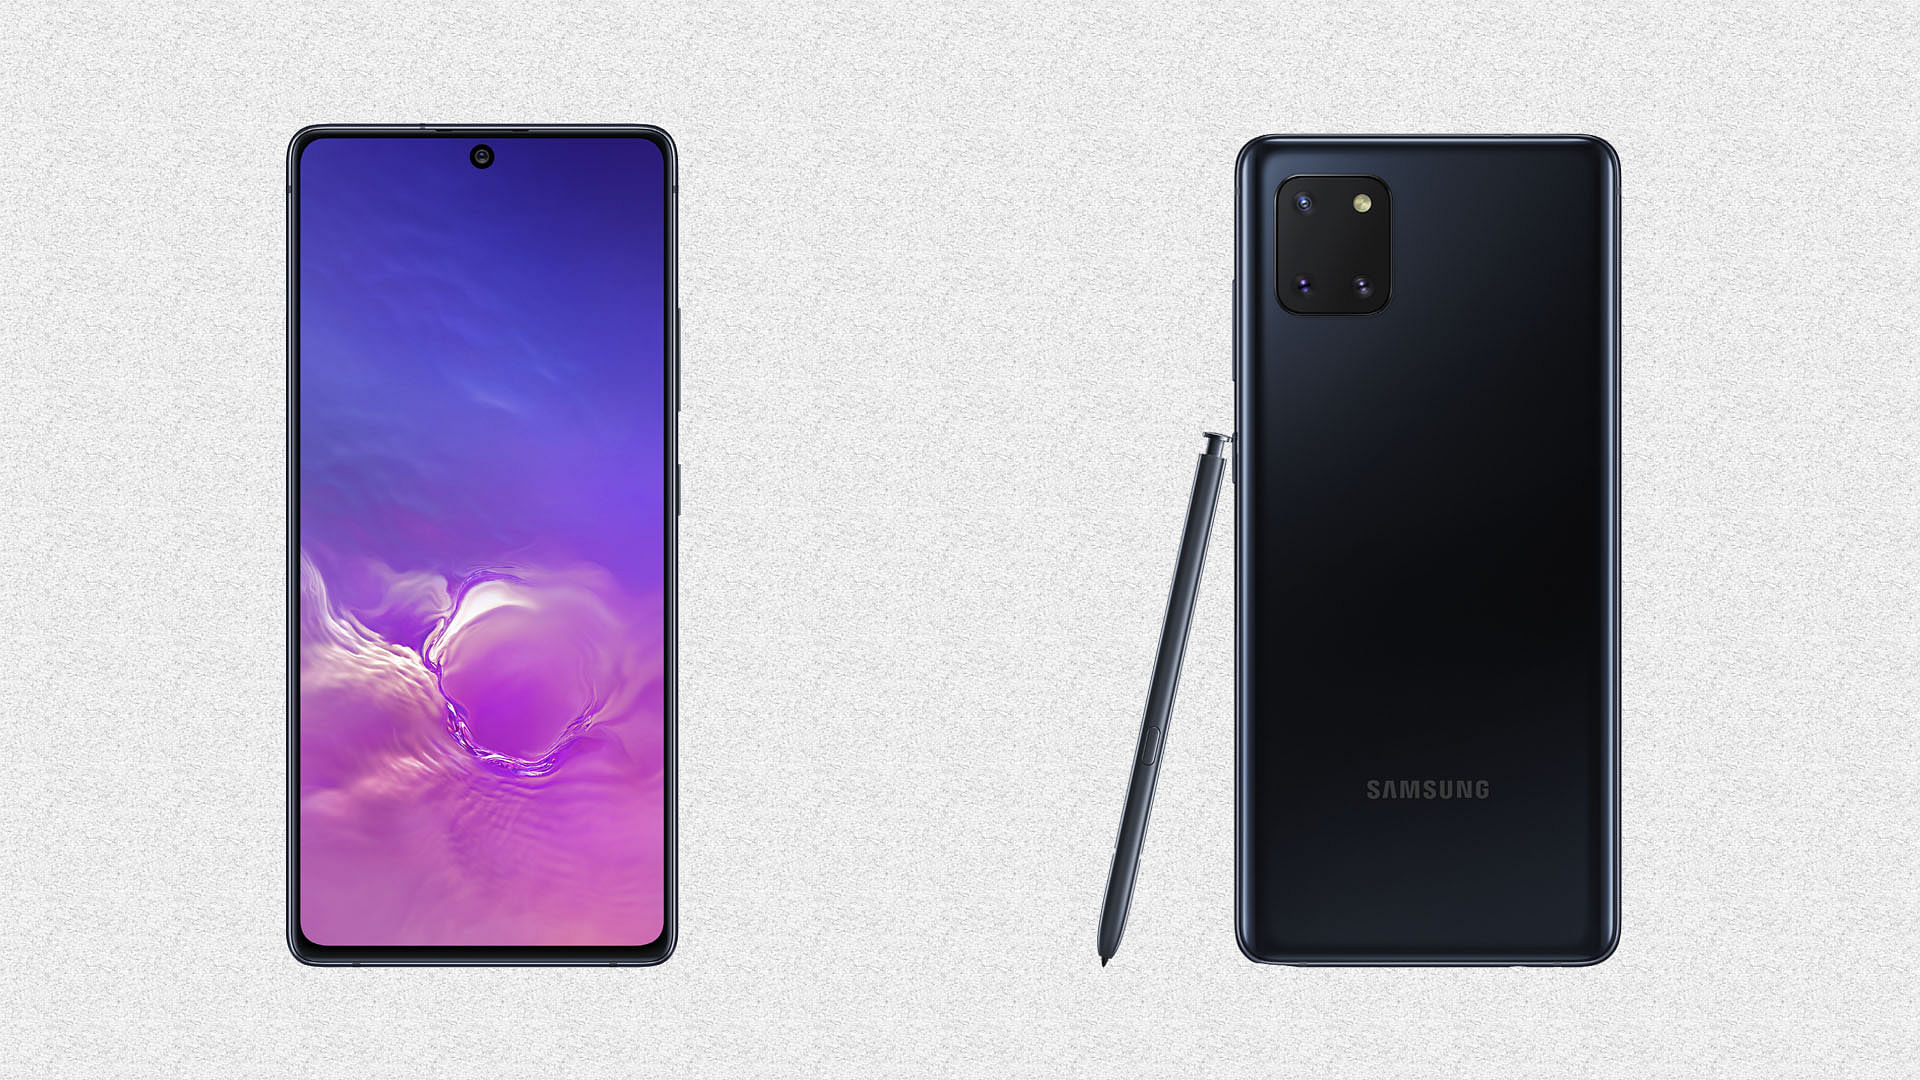 The Samsung Galaxy S10 Lite (left) and the Galaxy Note10 Lite (right)